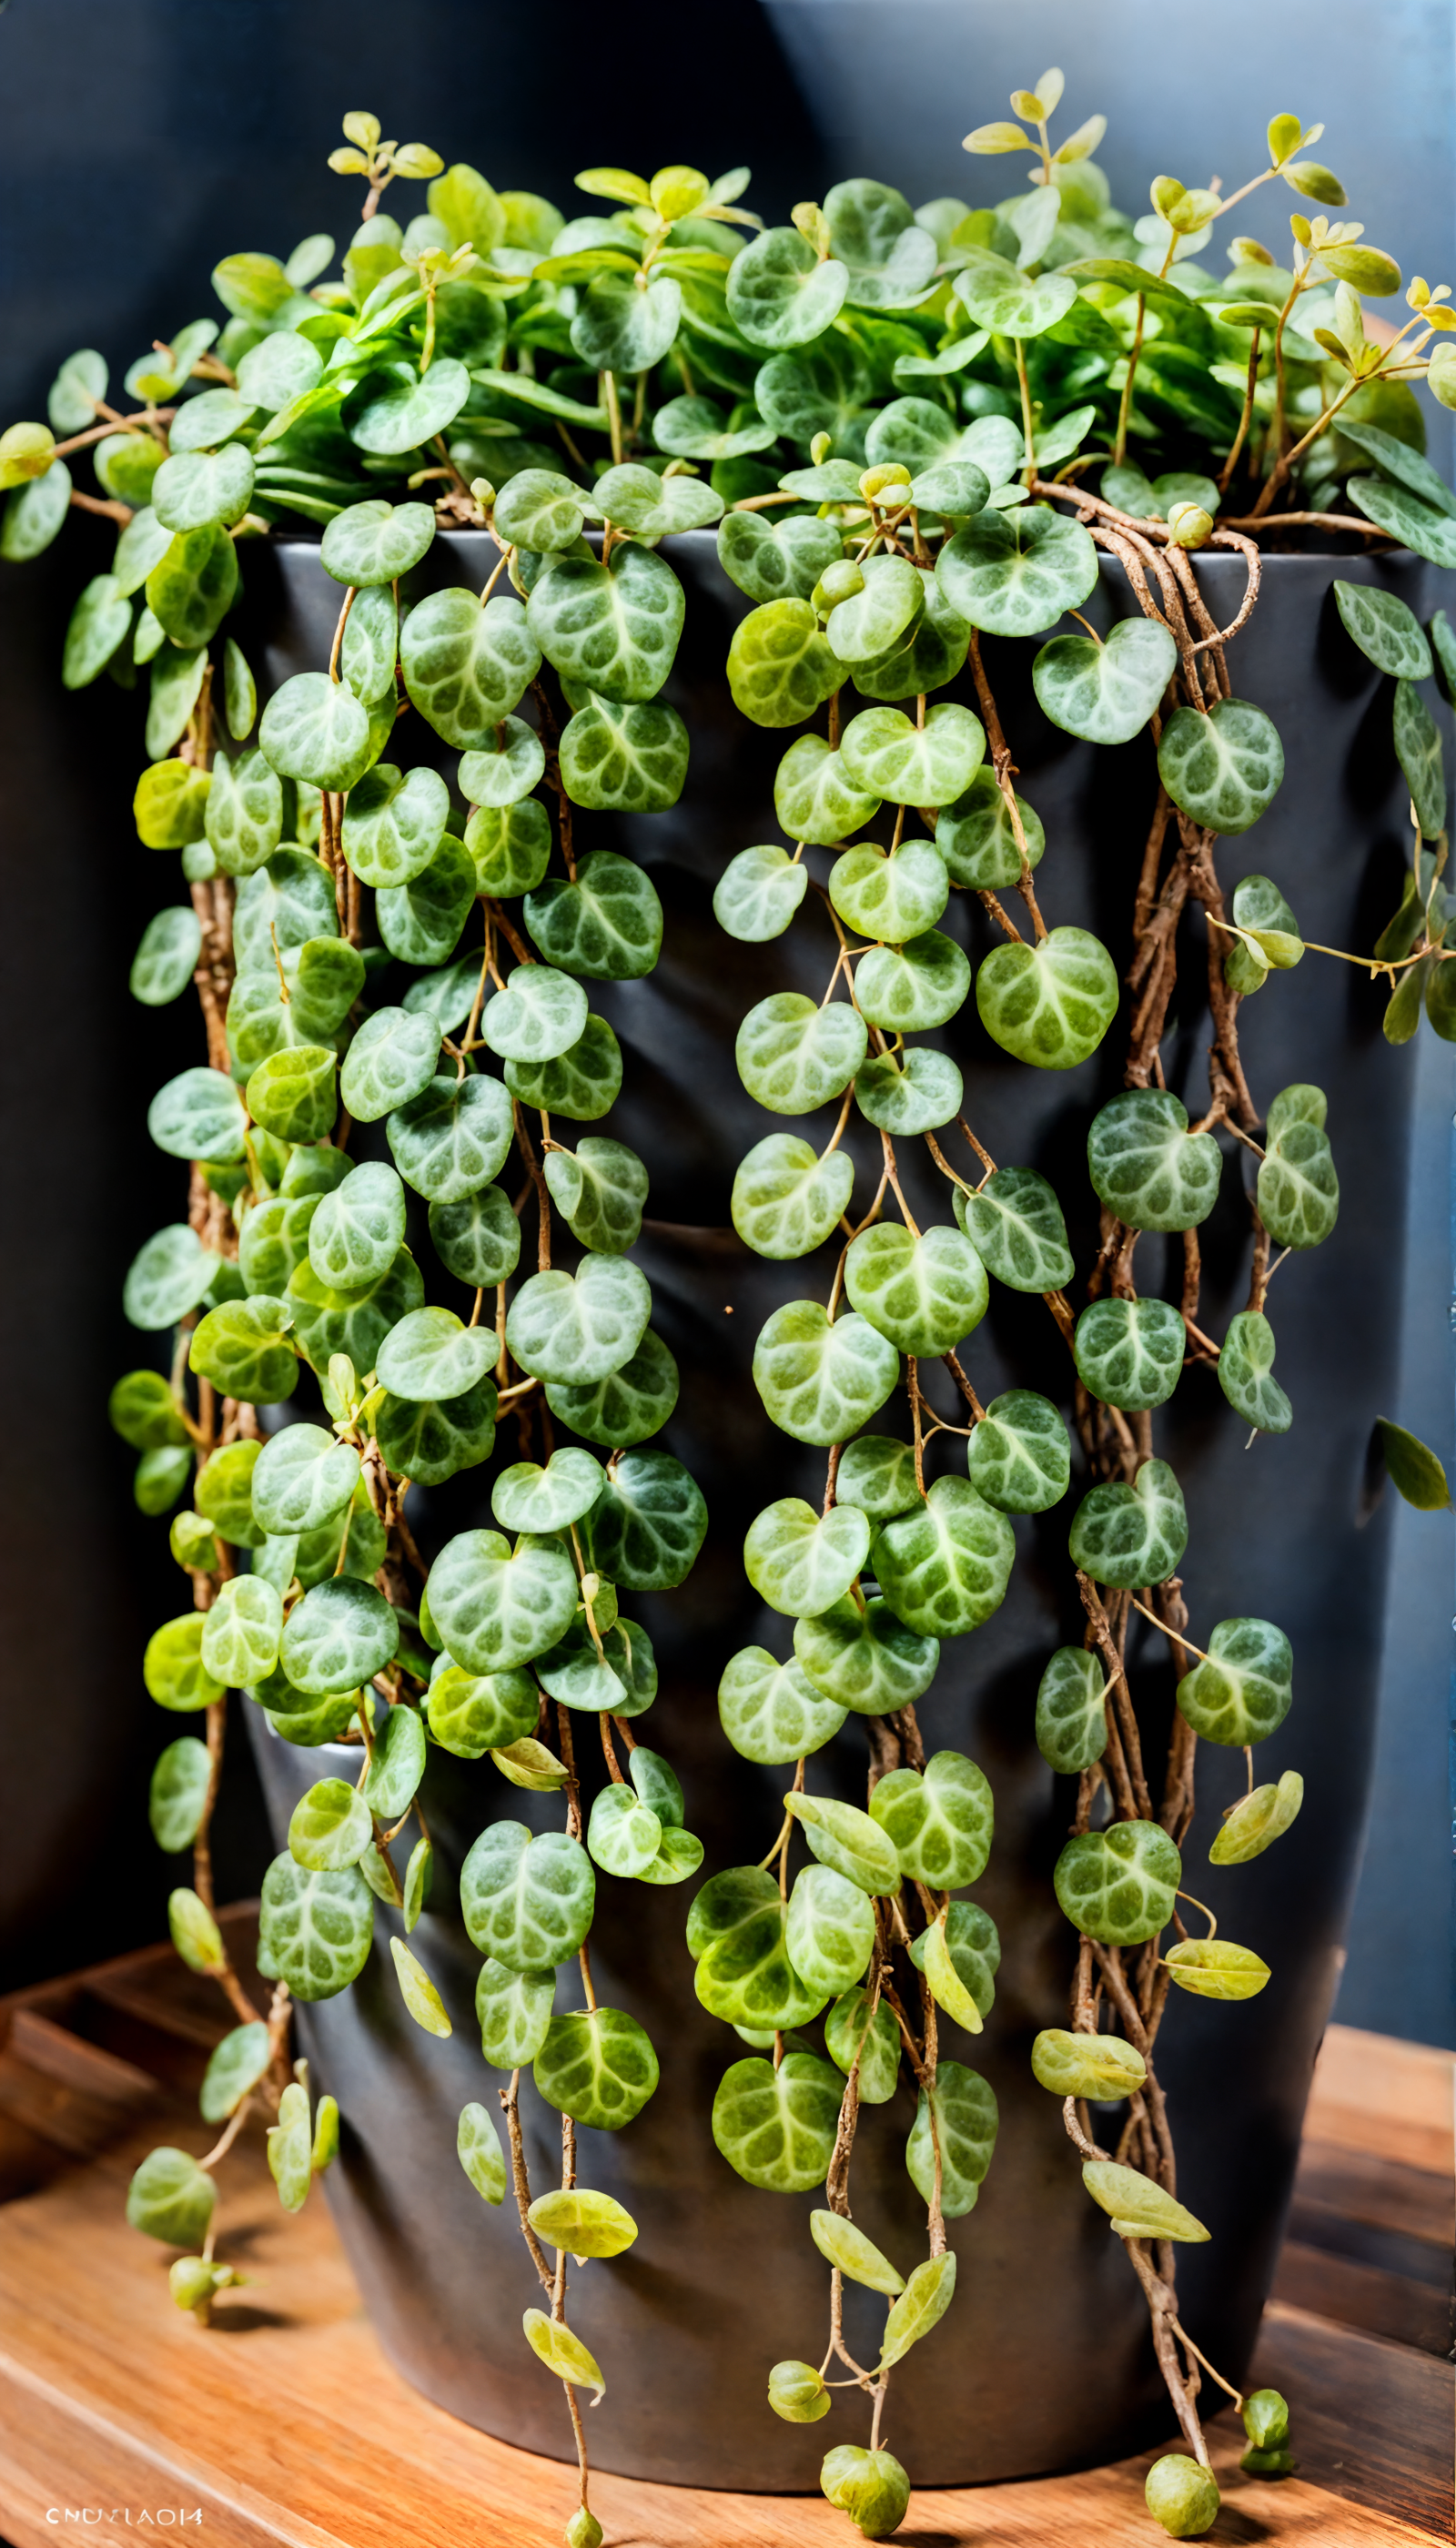 Peperomia prostrata, a trailing plant with round leaves, in a bowl planter on a wooden surface, well-lit.